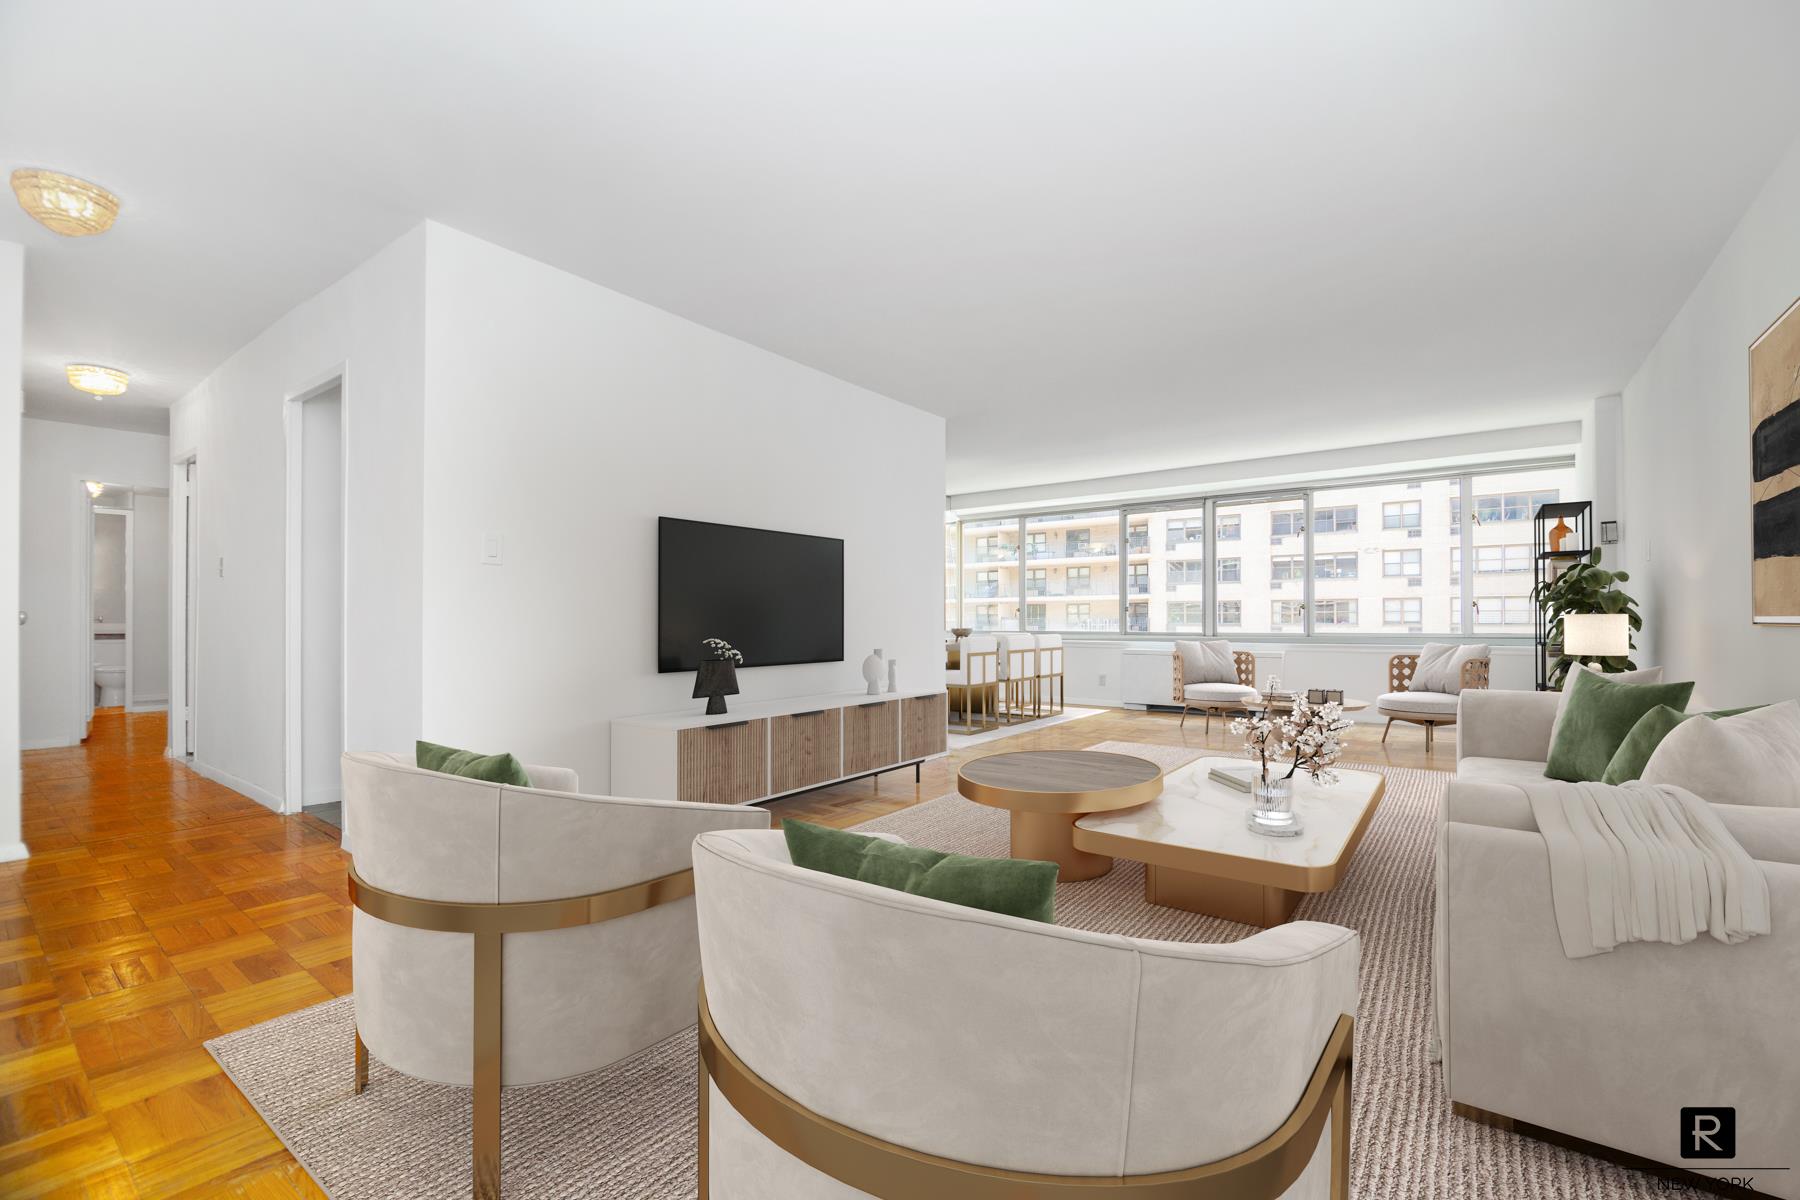 315 West 70th Street 8-K, Lincoln Square, Upper West Side, NYC - 2 Bedrooms  
2 Bathrooms  
5 Rooms - 